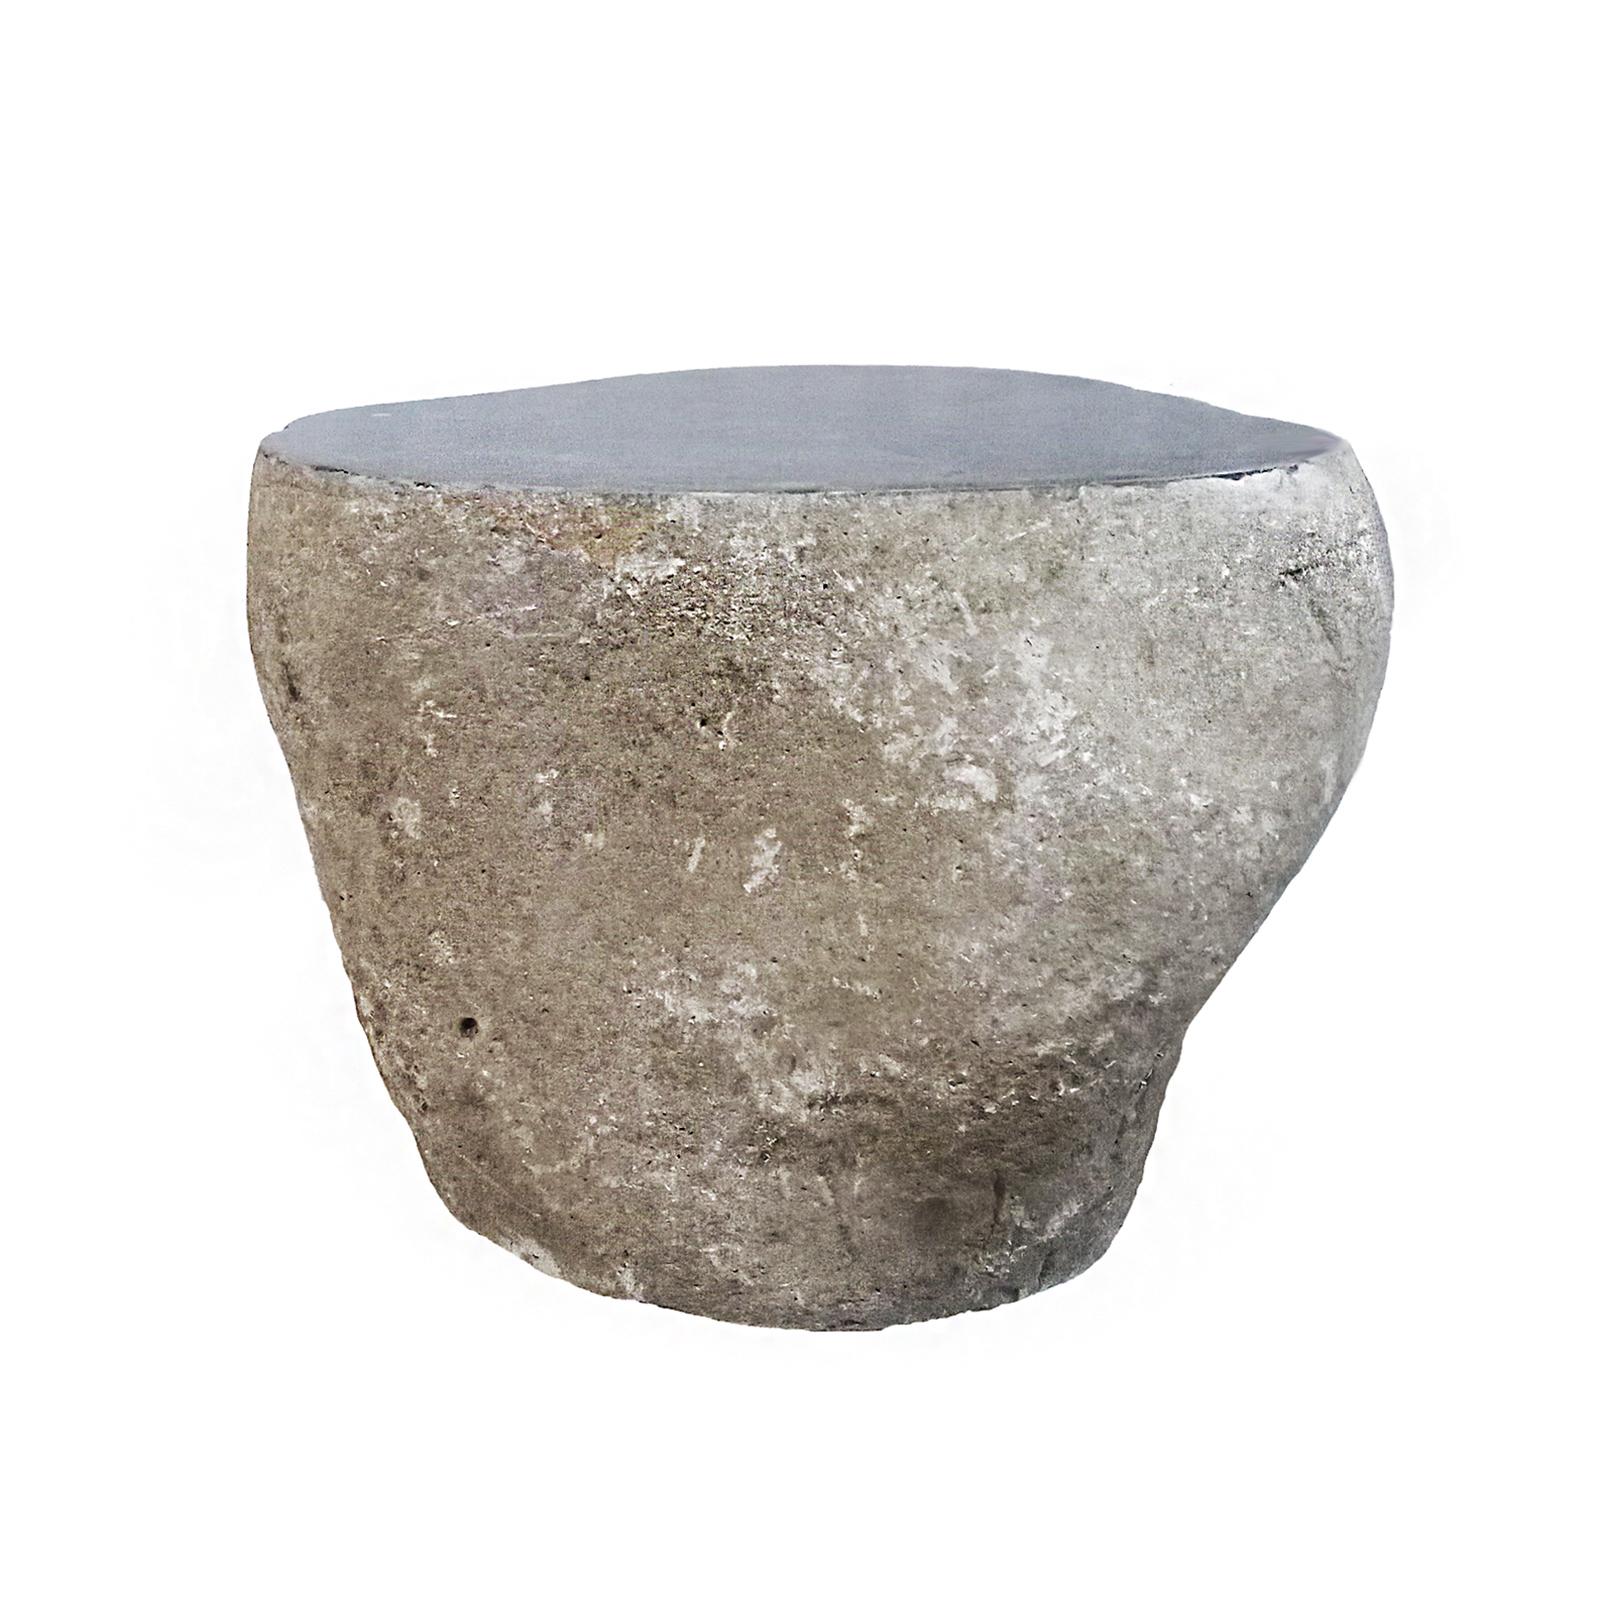 A beautiful solid stone end table, from Indonesia. Contemporary. 
Rustic, unfinished sides with a smoothly polished grey top. Irregular shape, determined by the natural state of the rock.  

23 inches wide, 17 inches deep, 16 inches high. Ideal for